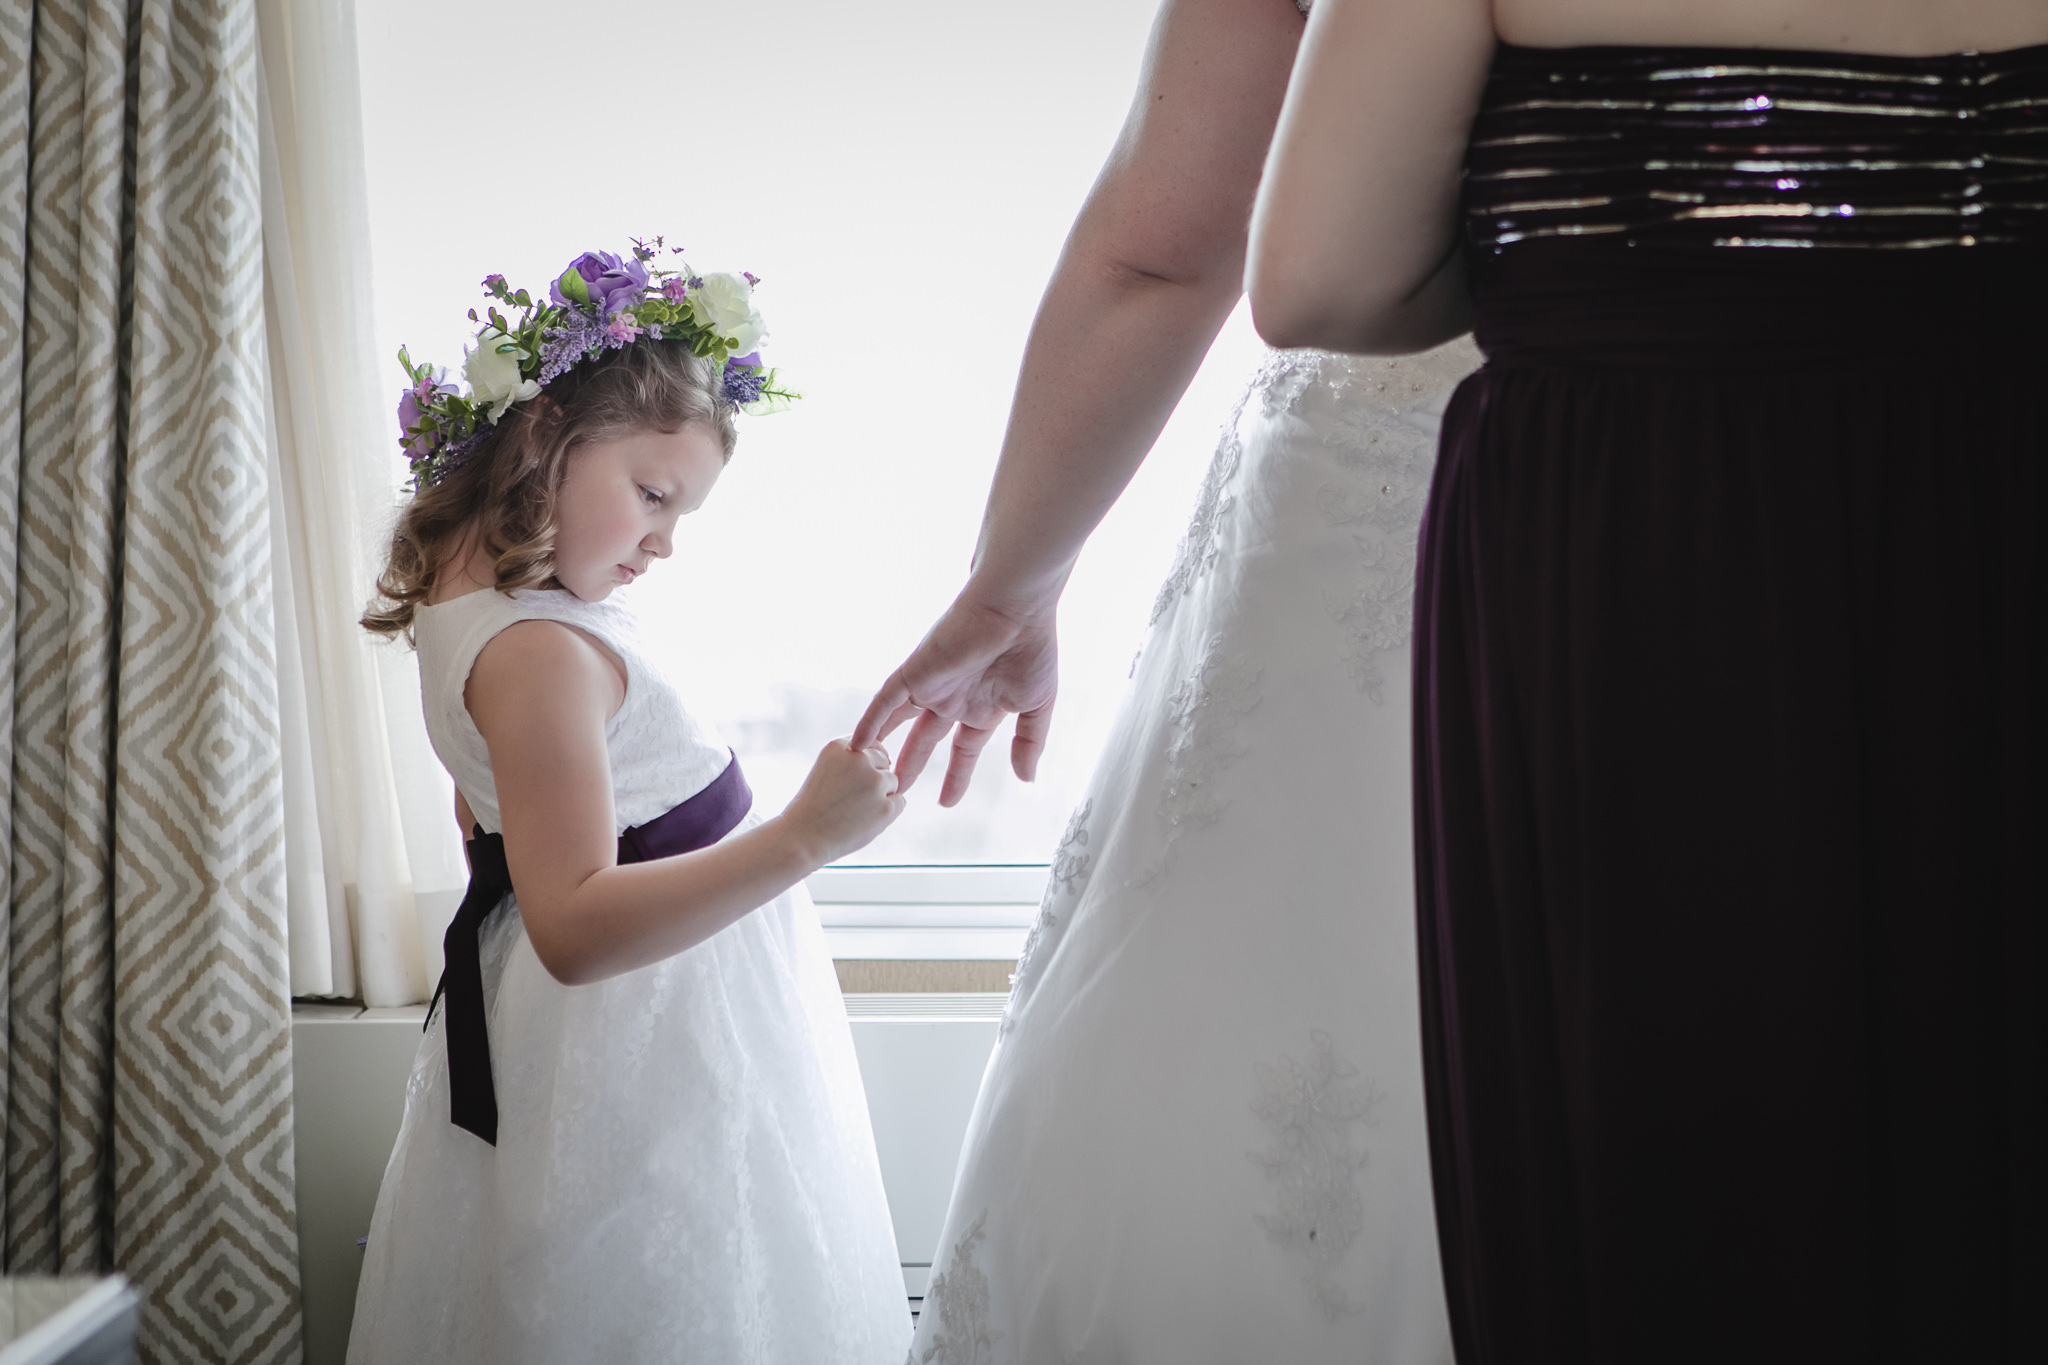 Flower girl looks at bride's engagement ring on her wedding day